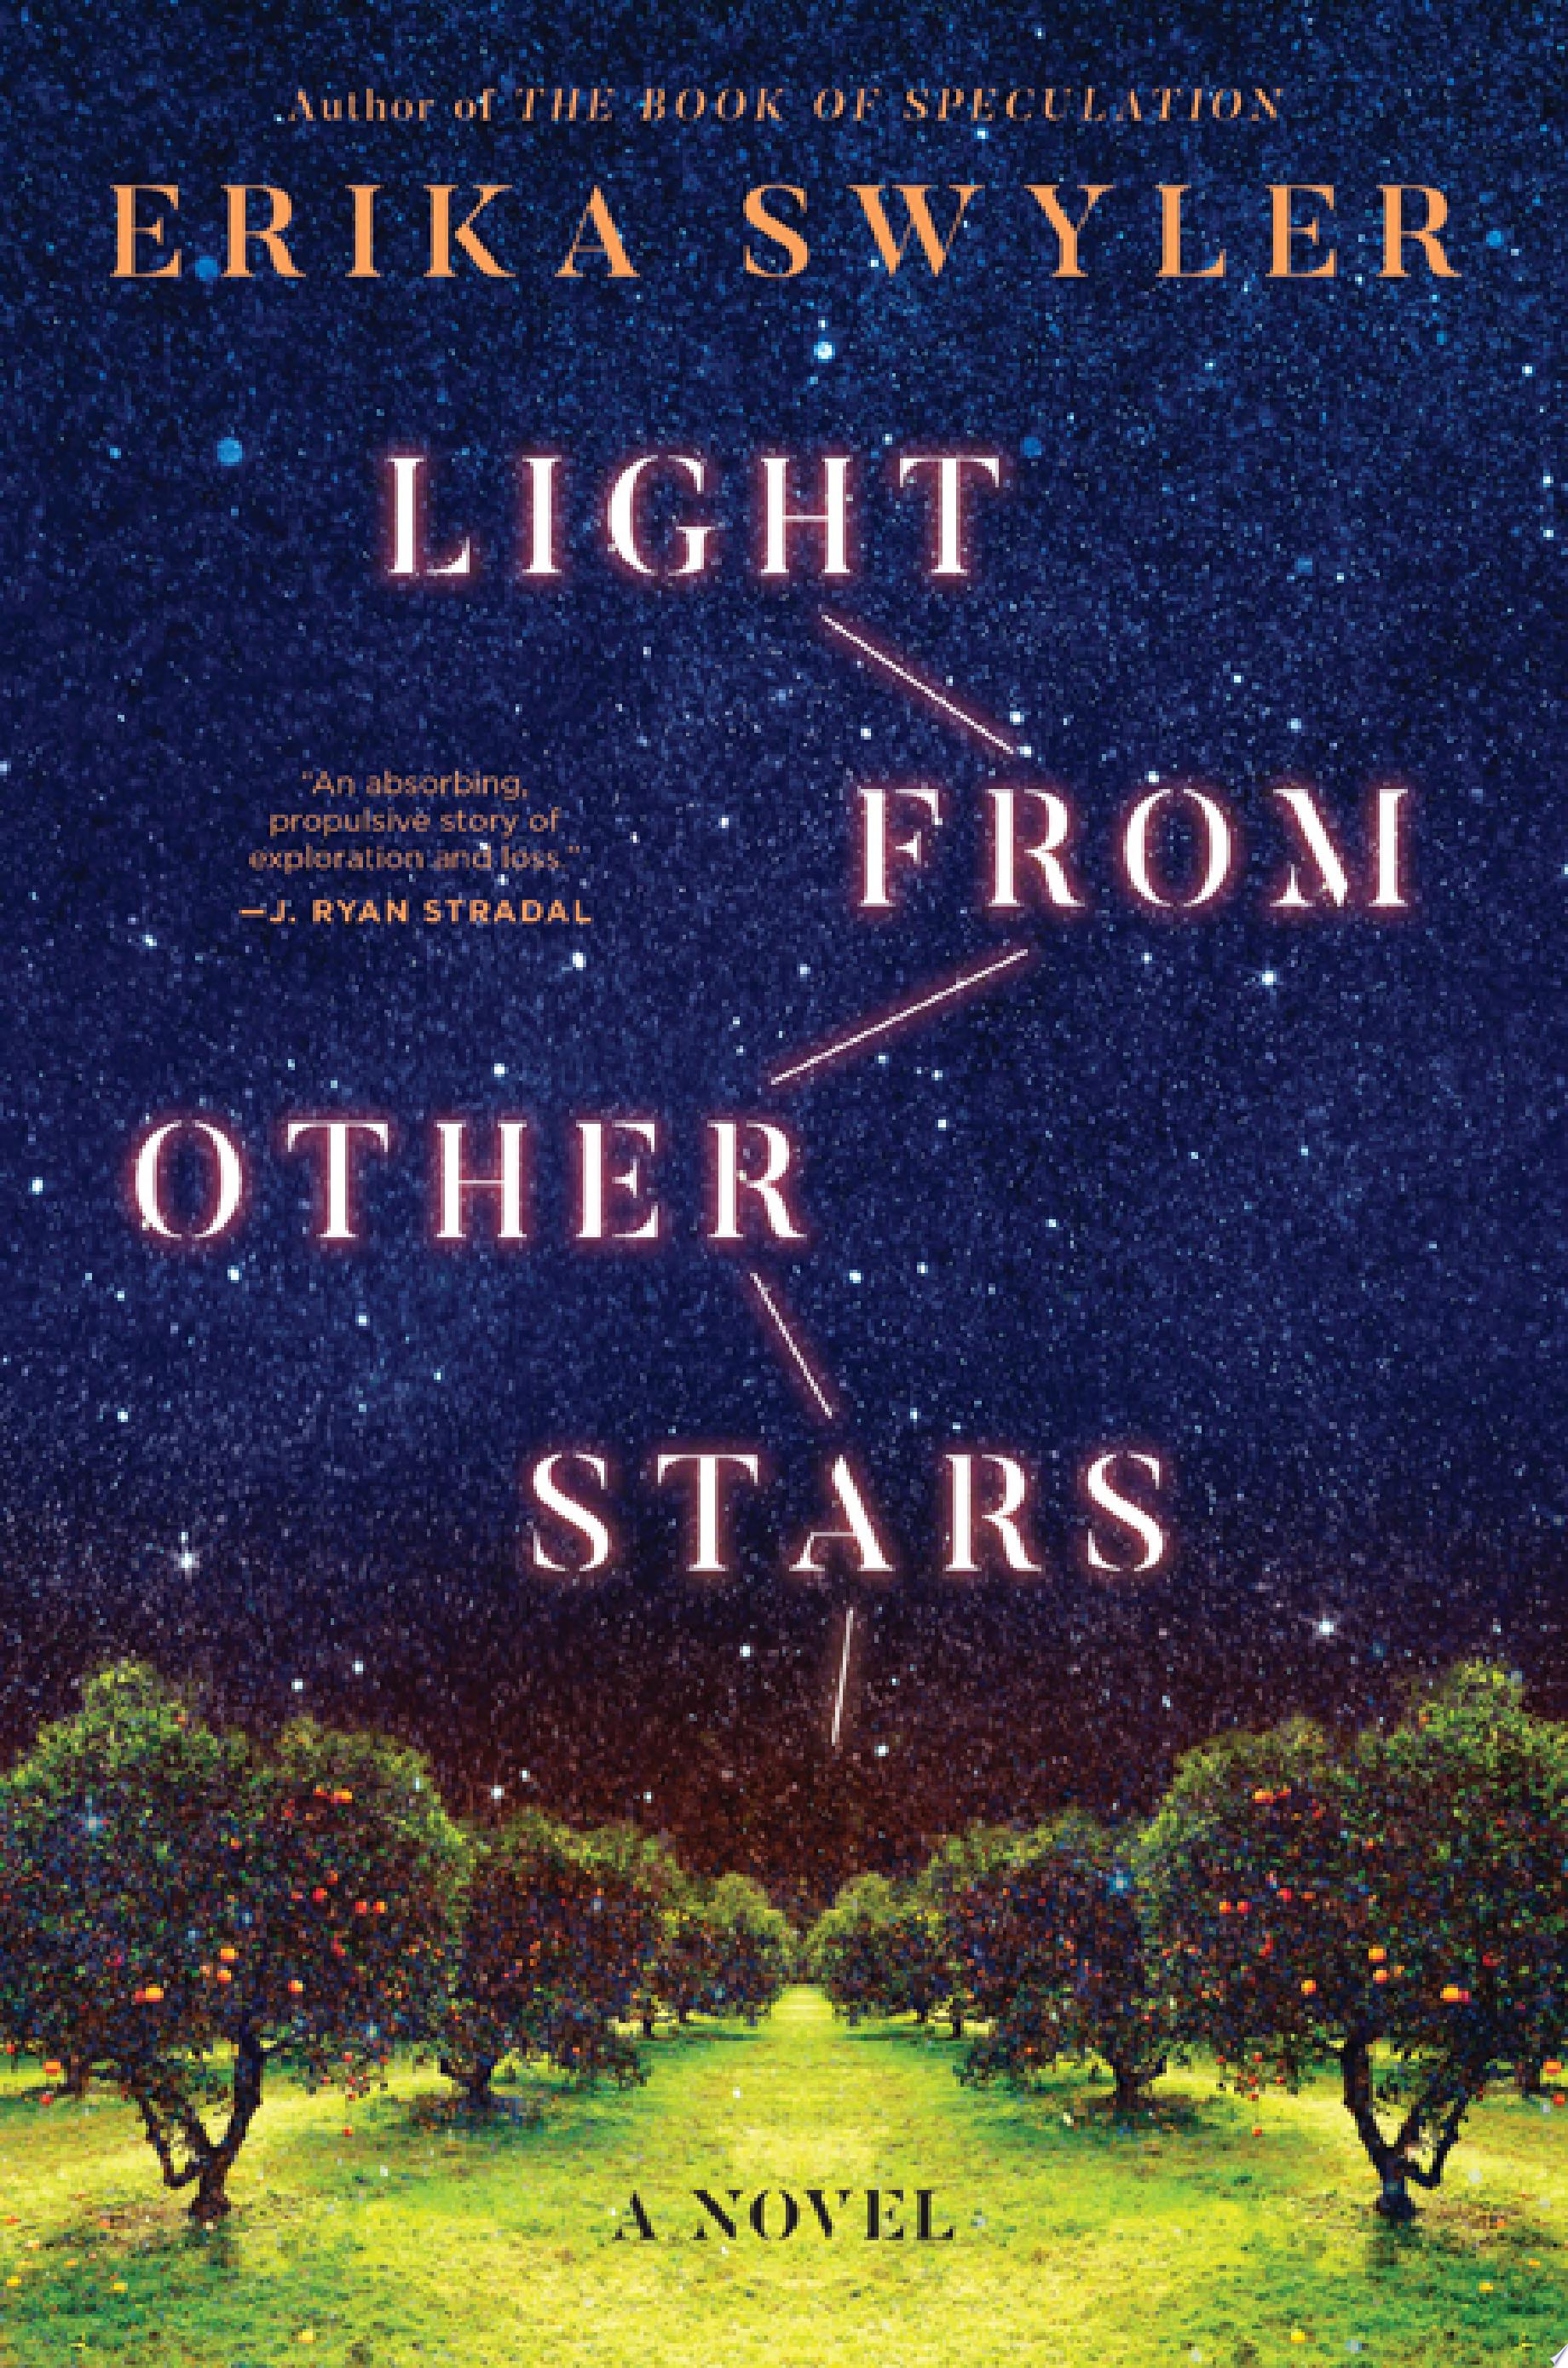 Image for "Light from Other Stars"